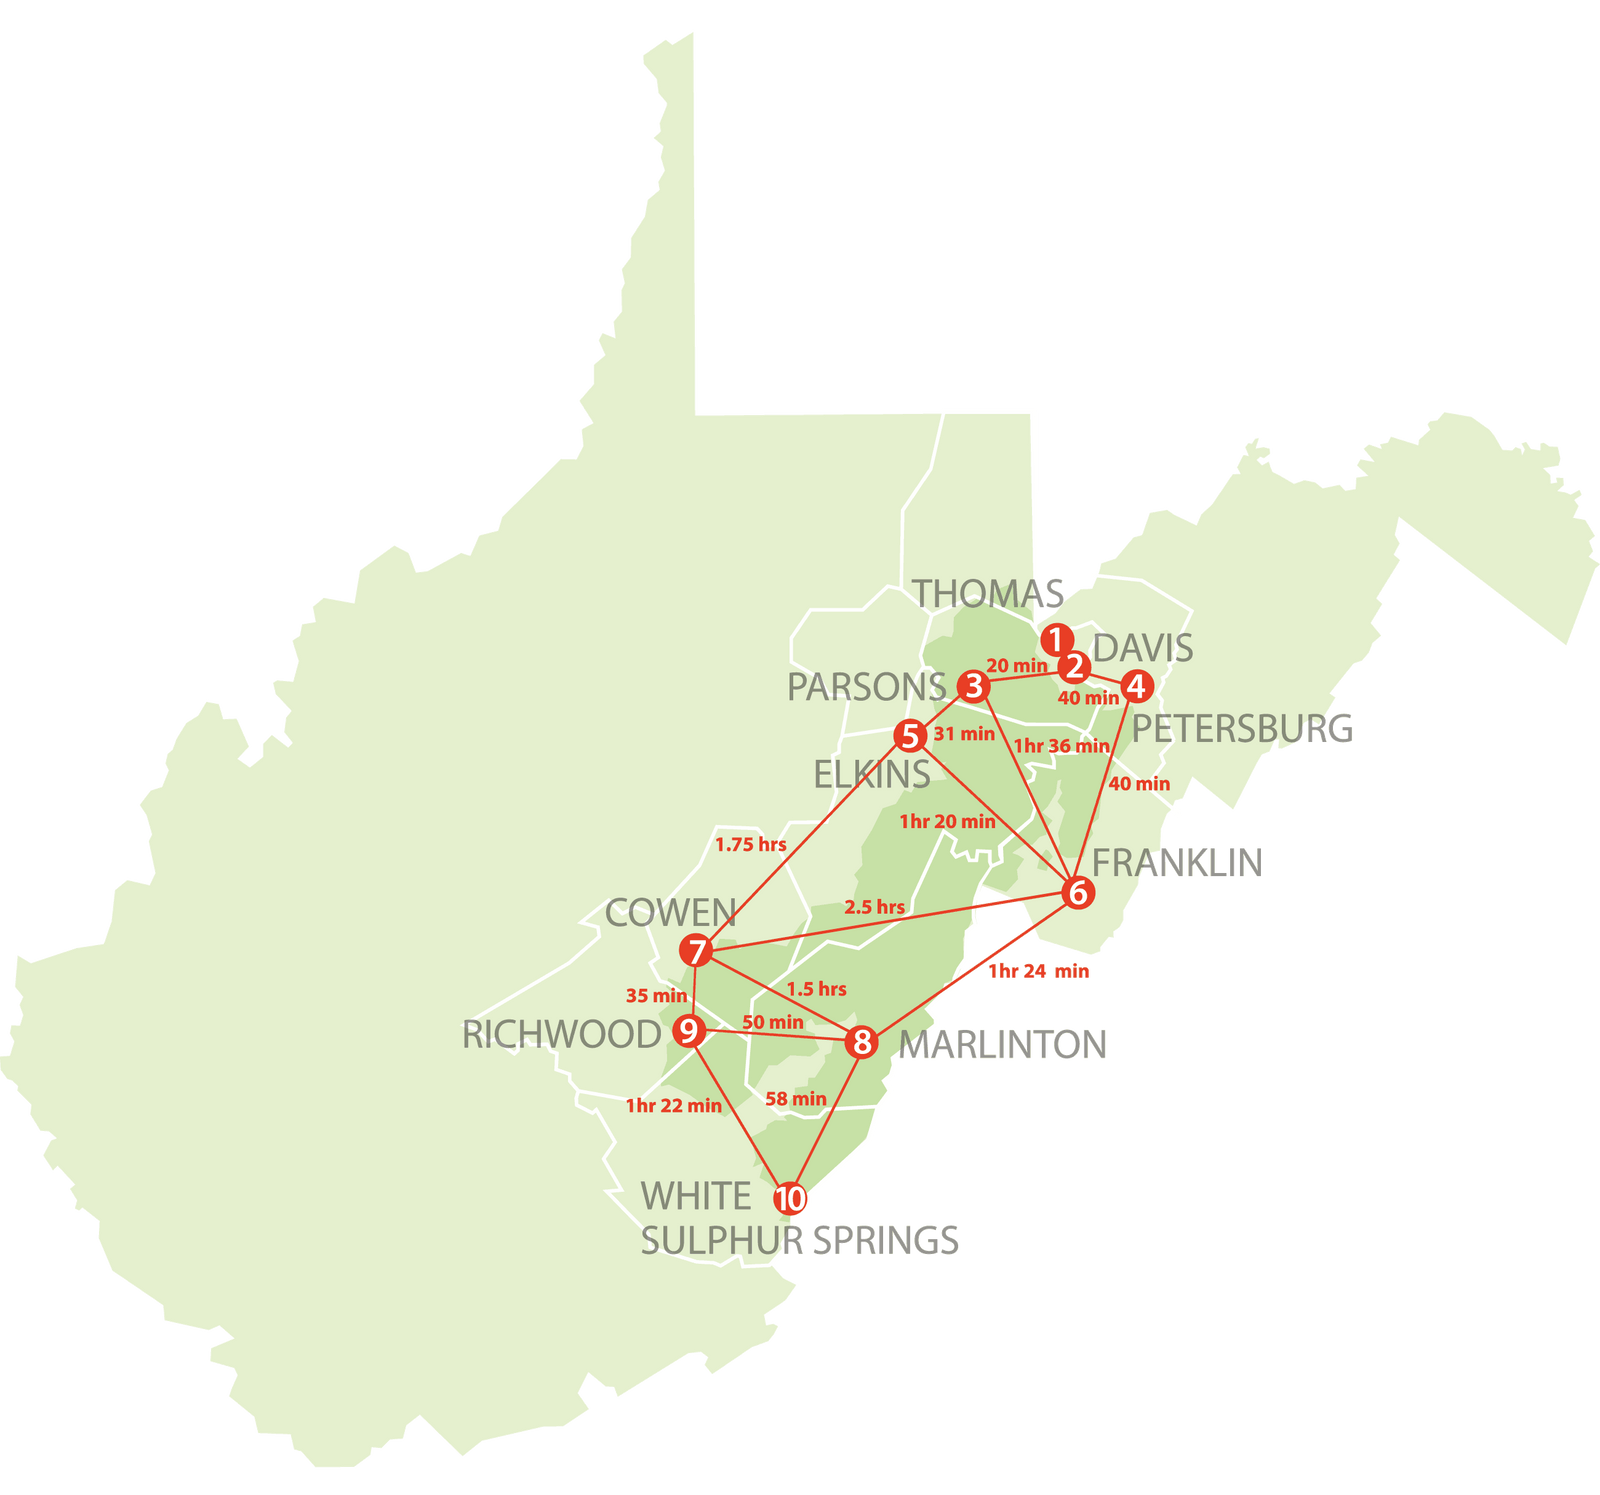 Map of WV showing updated forest boundaries